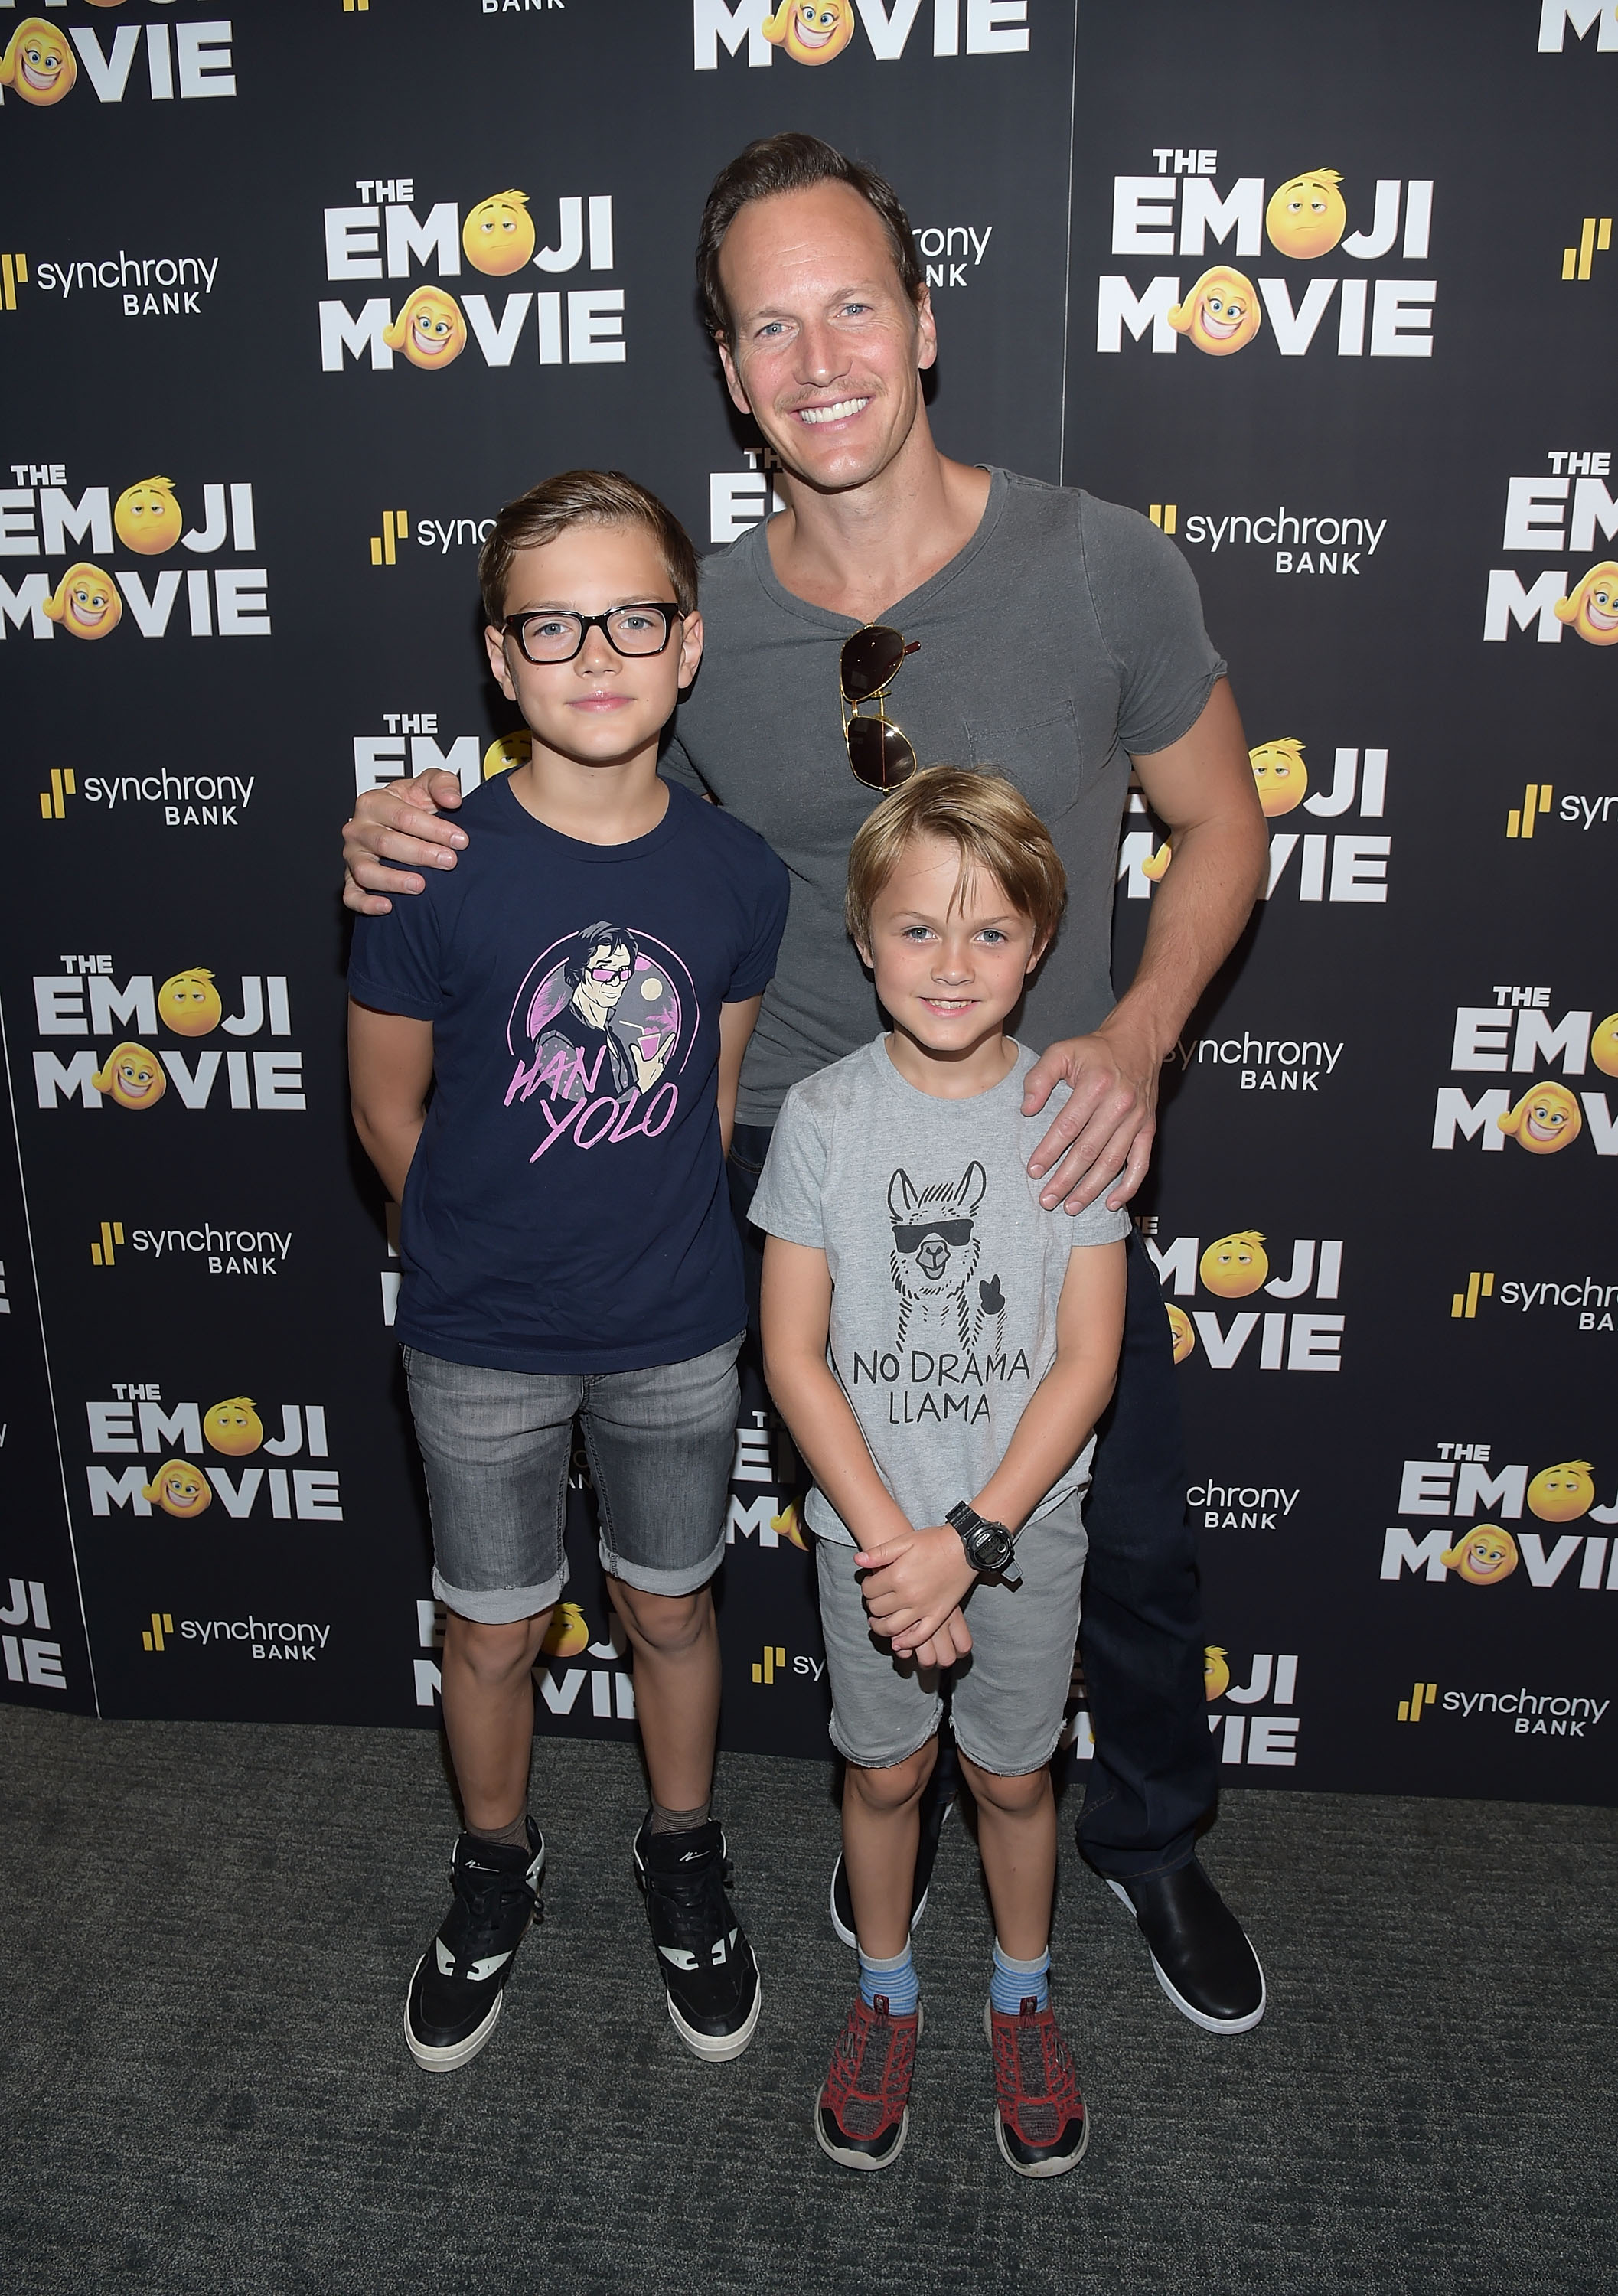 Kalin Patrick Wilson, Patrick Wilson and Kassian McCarrell Wilson attend "The Emoji Movie" New York Screening at New York Institute of Technology on July 23, 2017 in New York City | Source: Getty Images